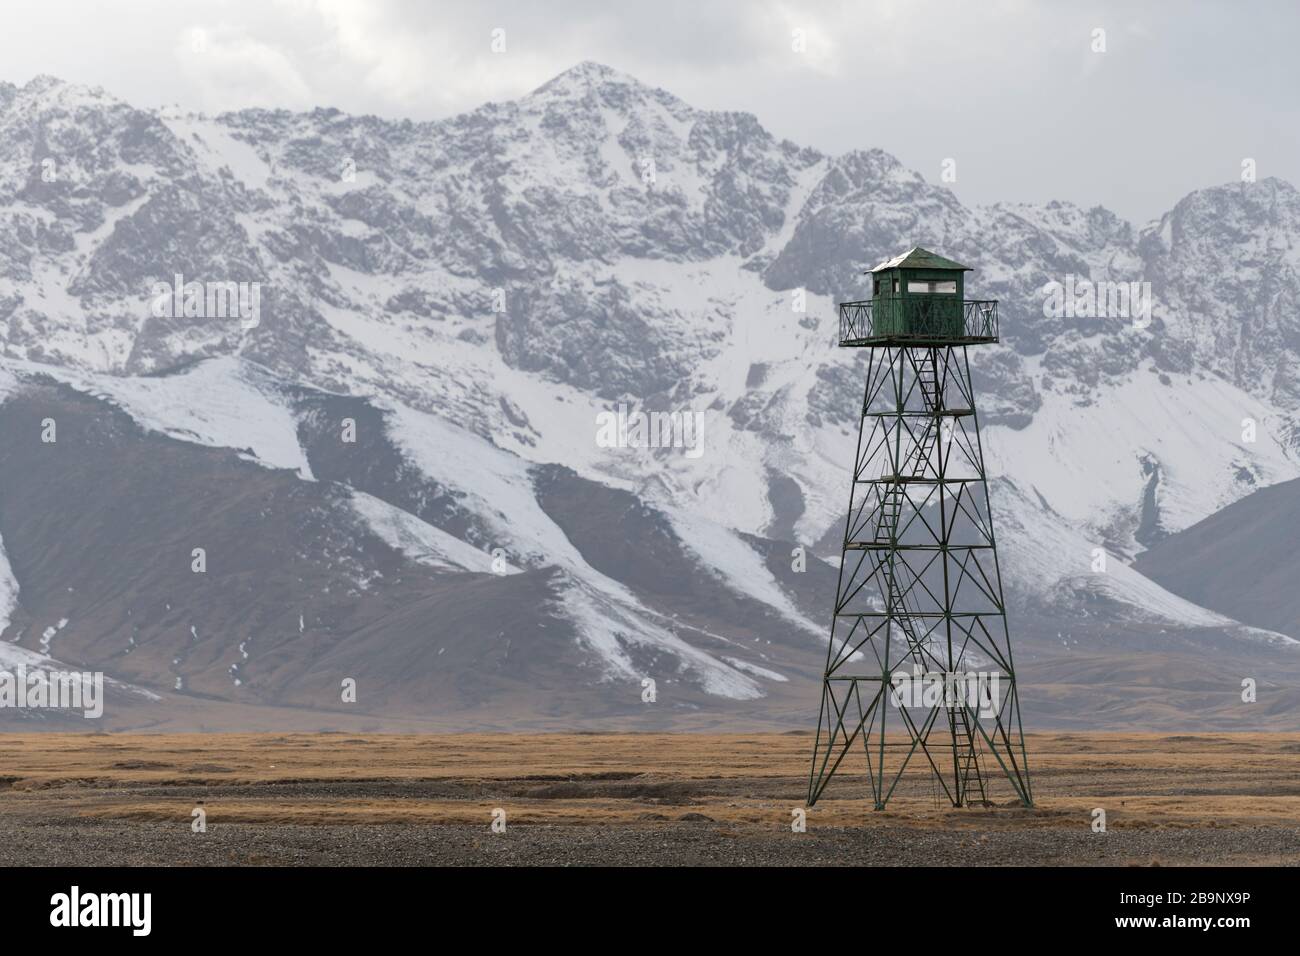 guards tower near the Chinese-Kyrgyz border of Torugart, with mountain landscape showing the typical Tian Shan mountains around Chatyr Kol lake in Kyr Stock Photo